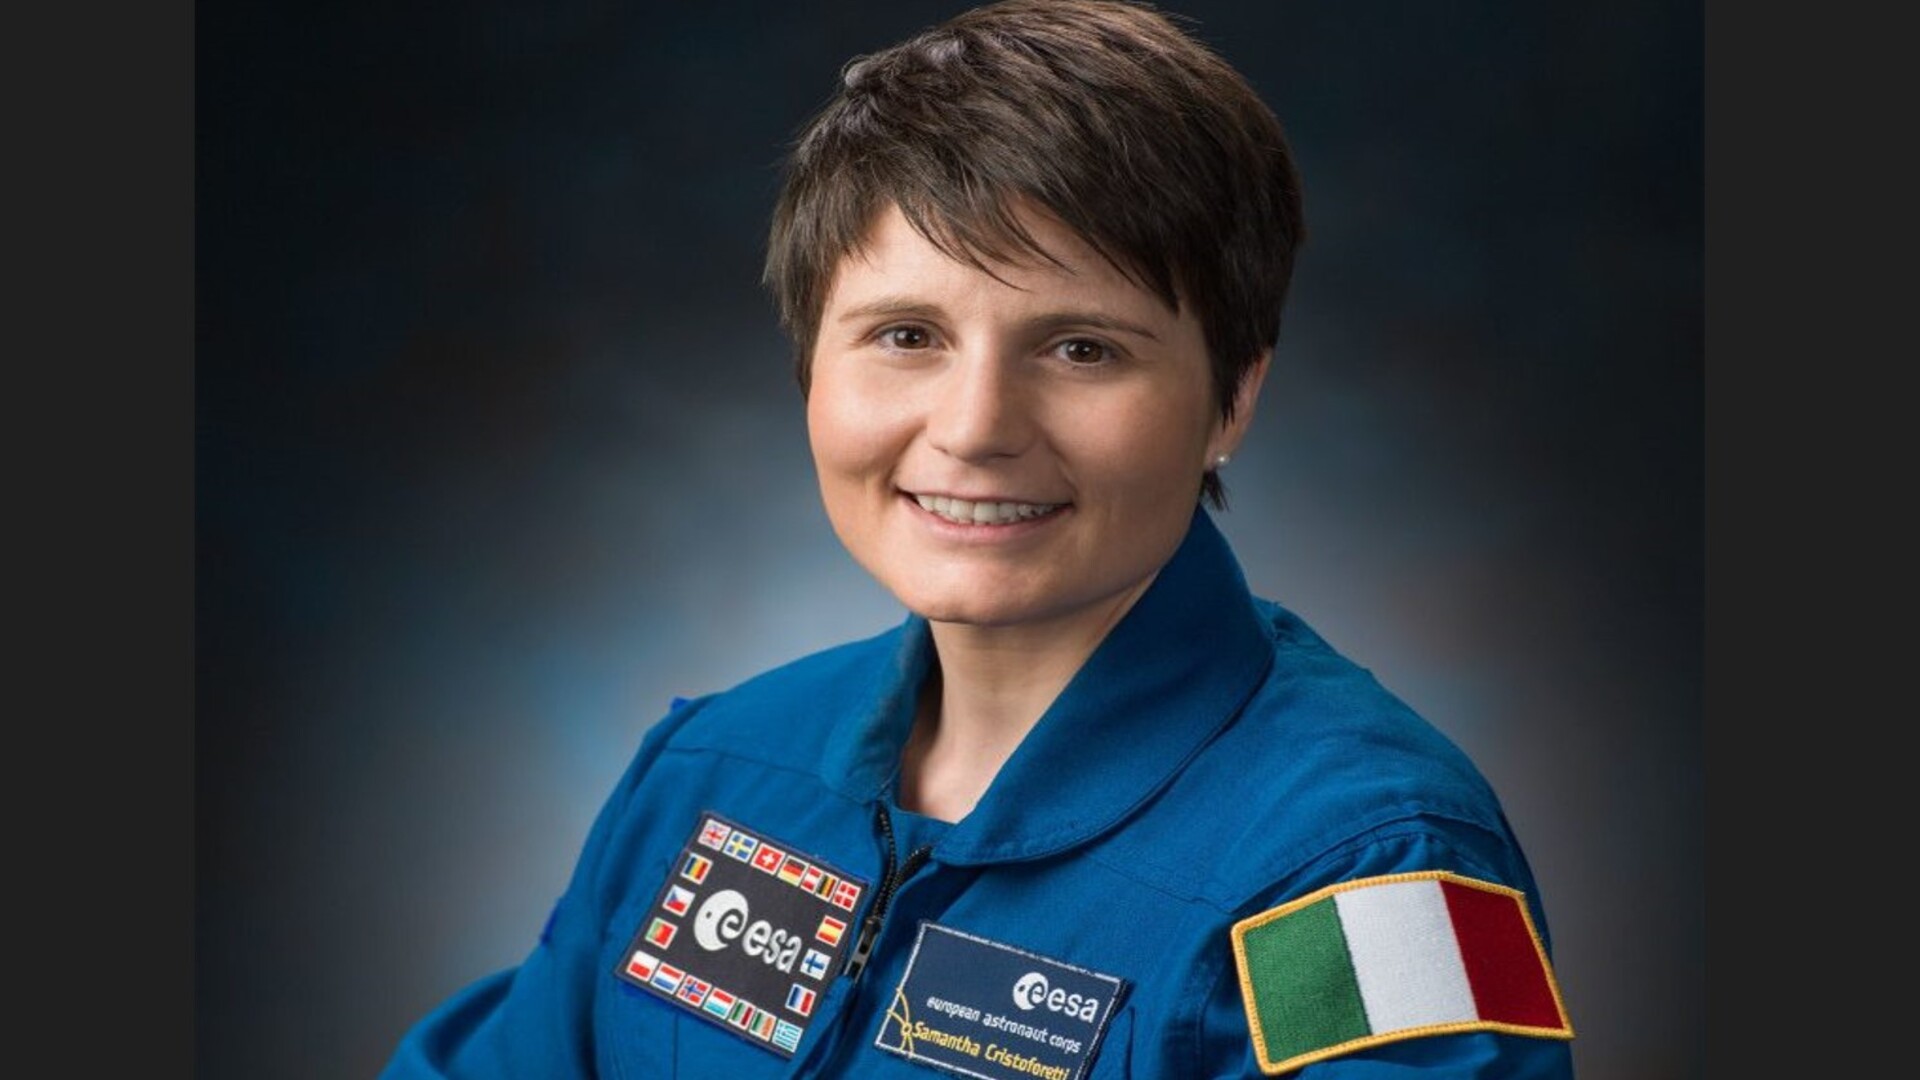 ASI - SAMANTHA CRISTOFORETTI WILL BE THE COMMANDER OF THE ISS